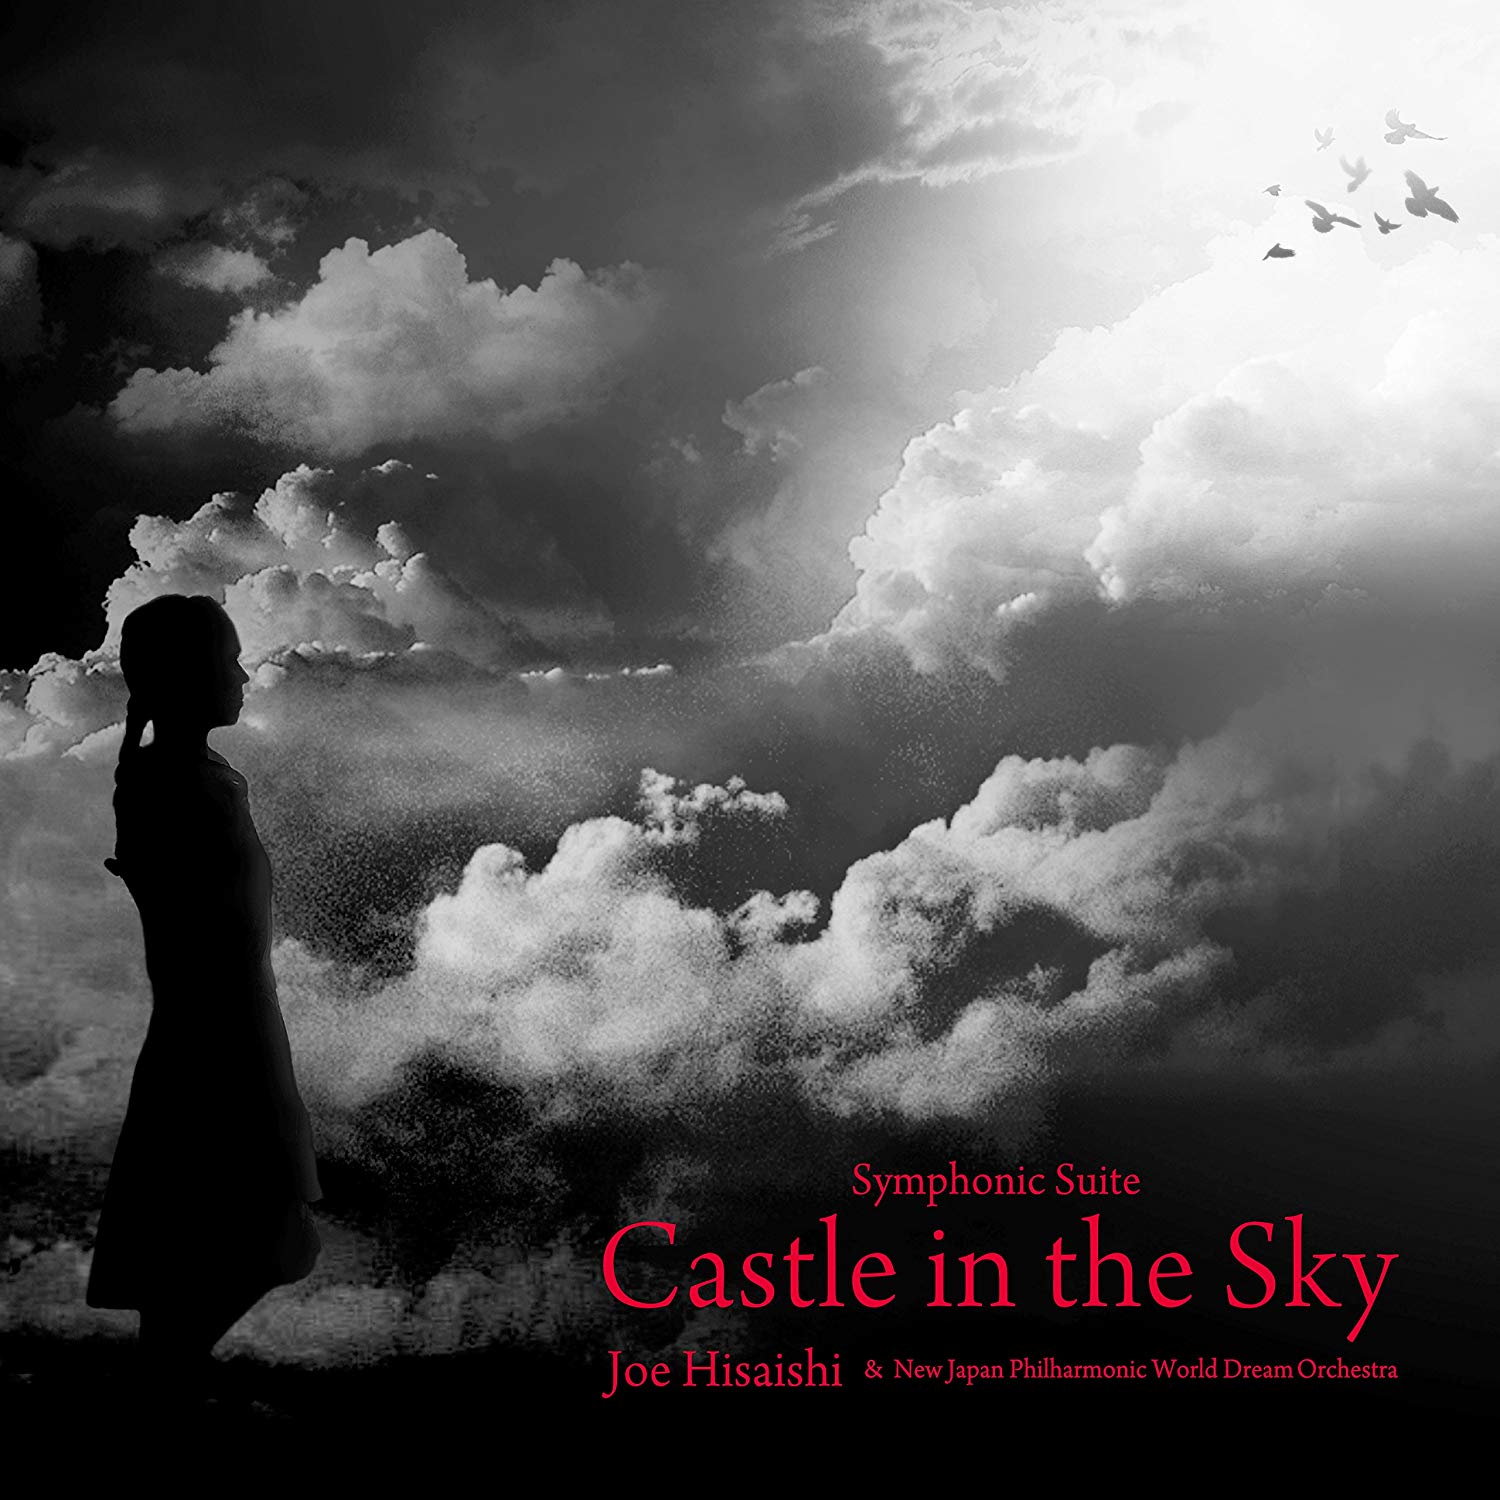 Dream orchestra. New Japan Philharmonic World Dream Orchestra Joe Hisaishi. The Castle in the Sky Joe Hisaishi. World Dream Orchestra. 久石譲 Symphonic Suite “Castle in the Sky”.